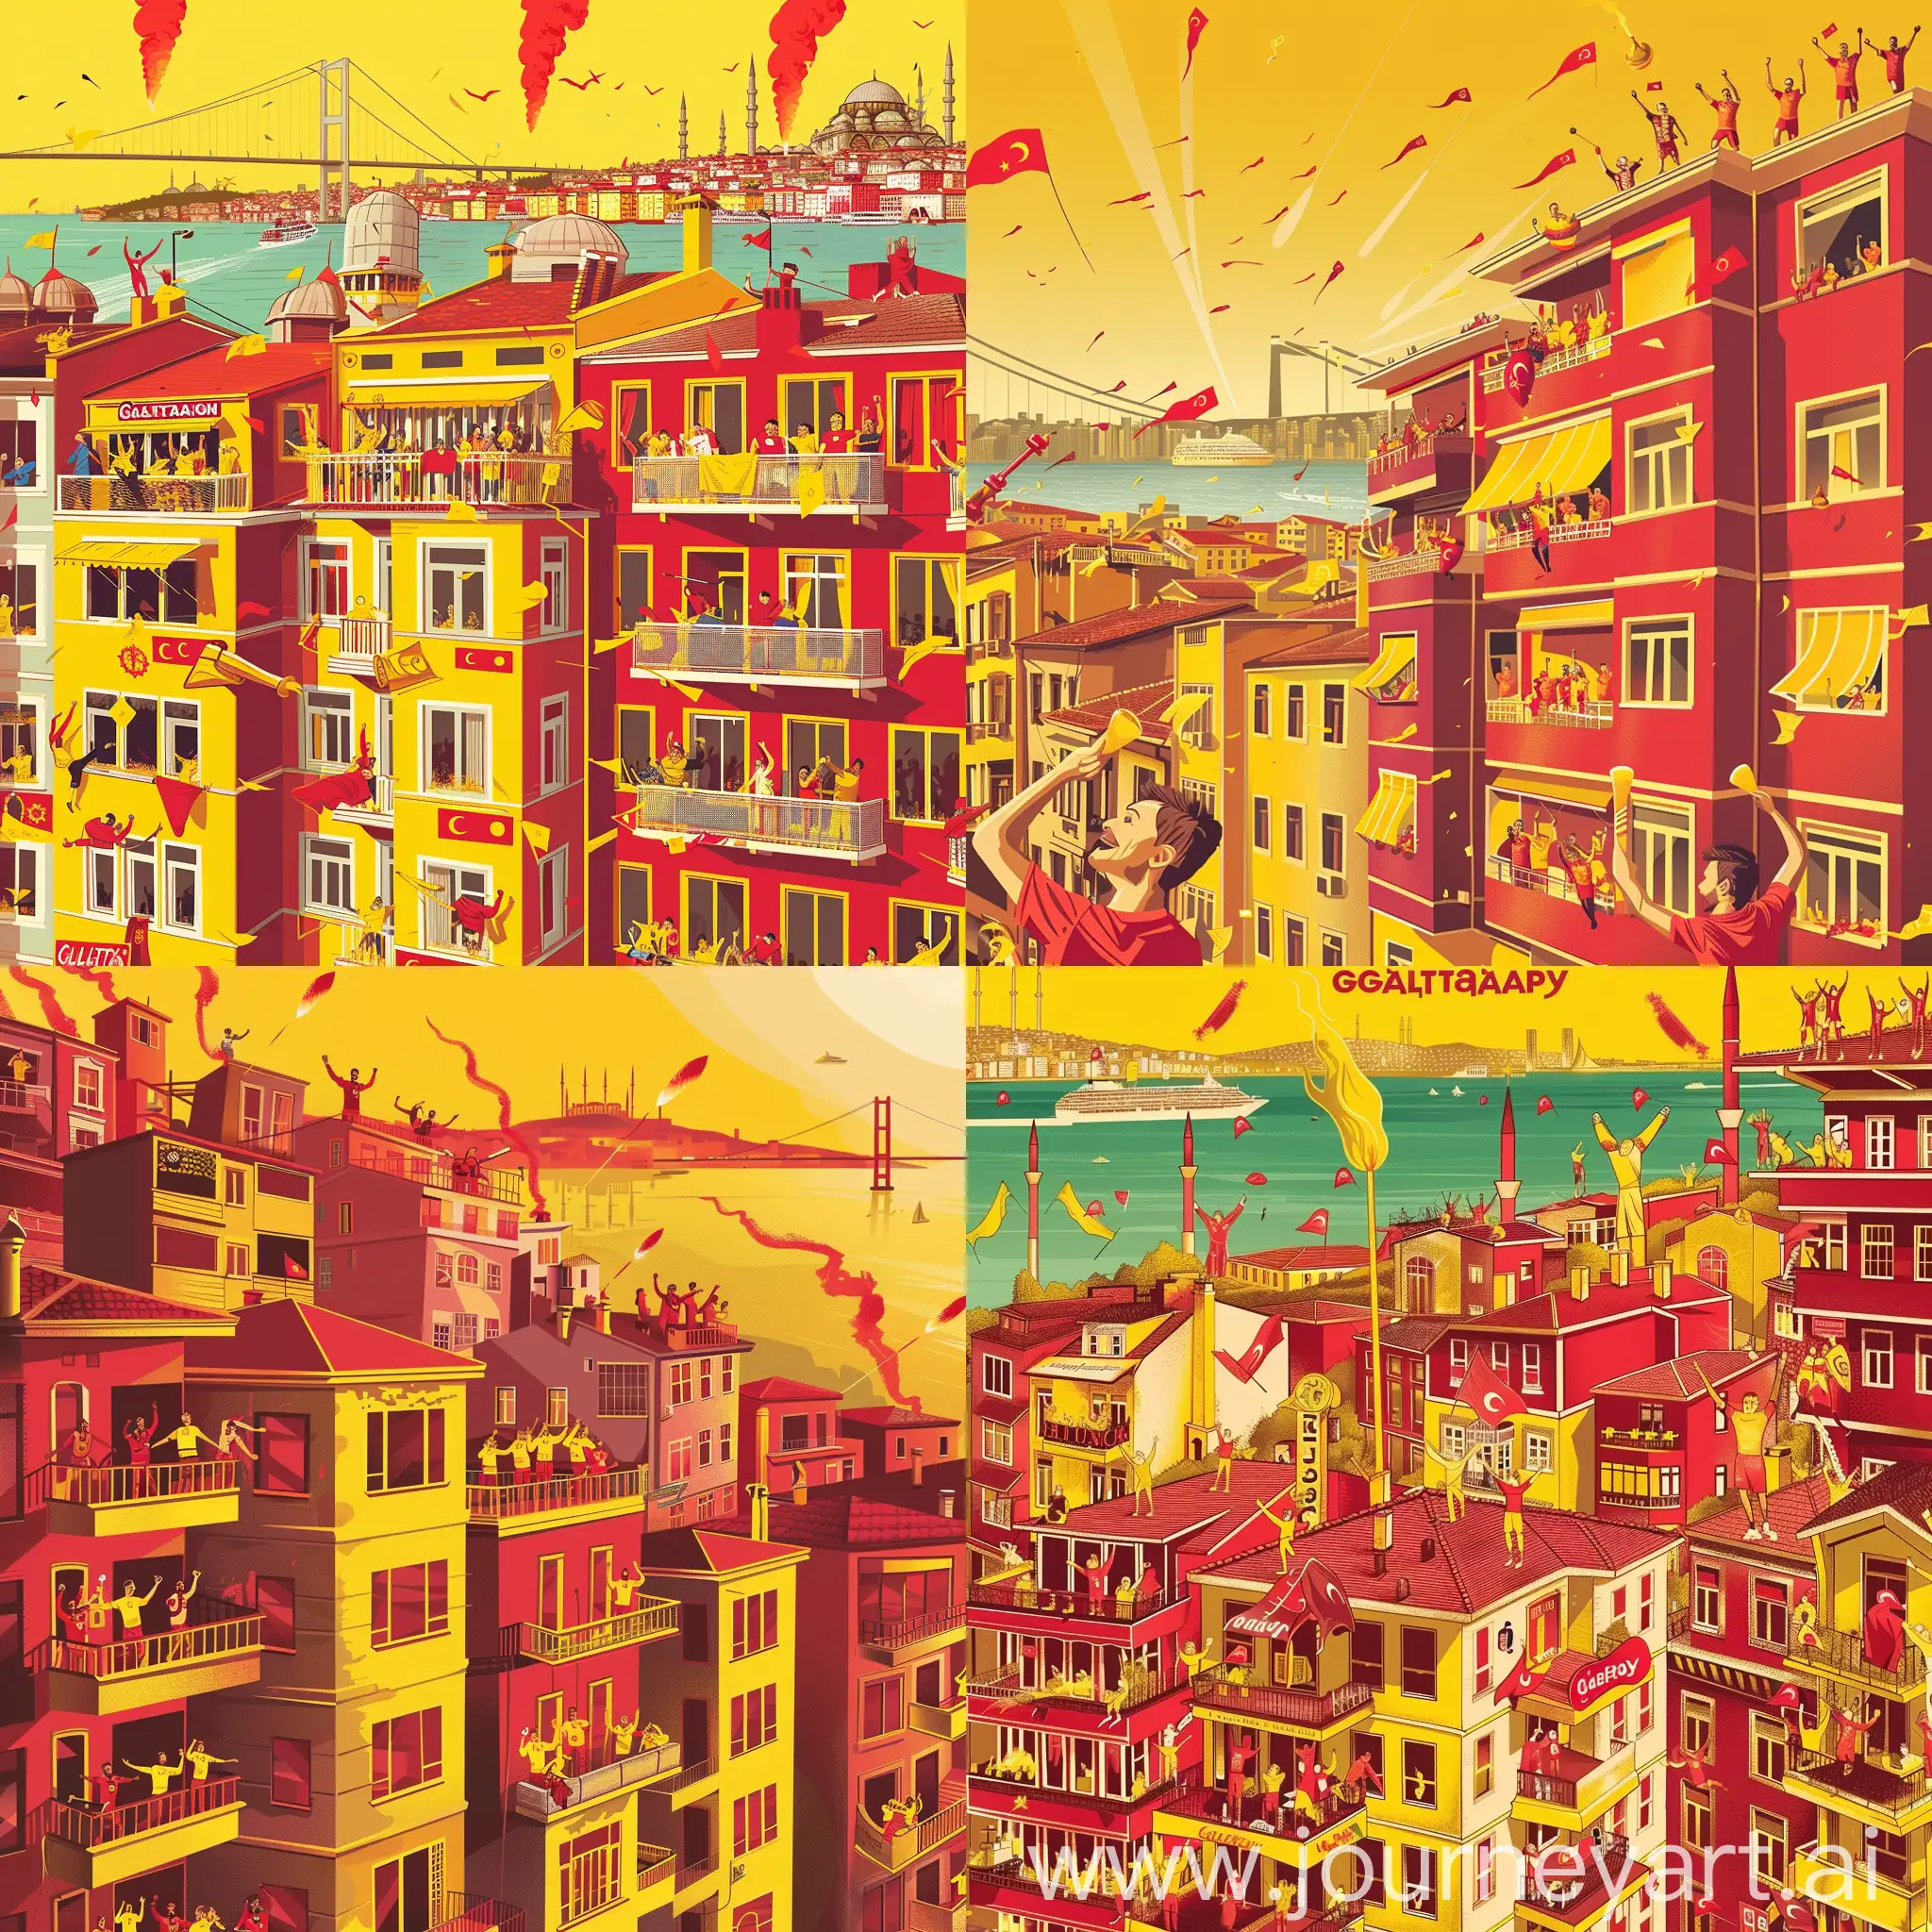 Galatasaray championship poster illustration, Yellow-Red predominantly buildings and fans, celebrating from balconies, Bosphorus in the background, Galatasaray fans, yellow torch, red torch and yellow-red colors